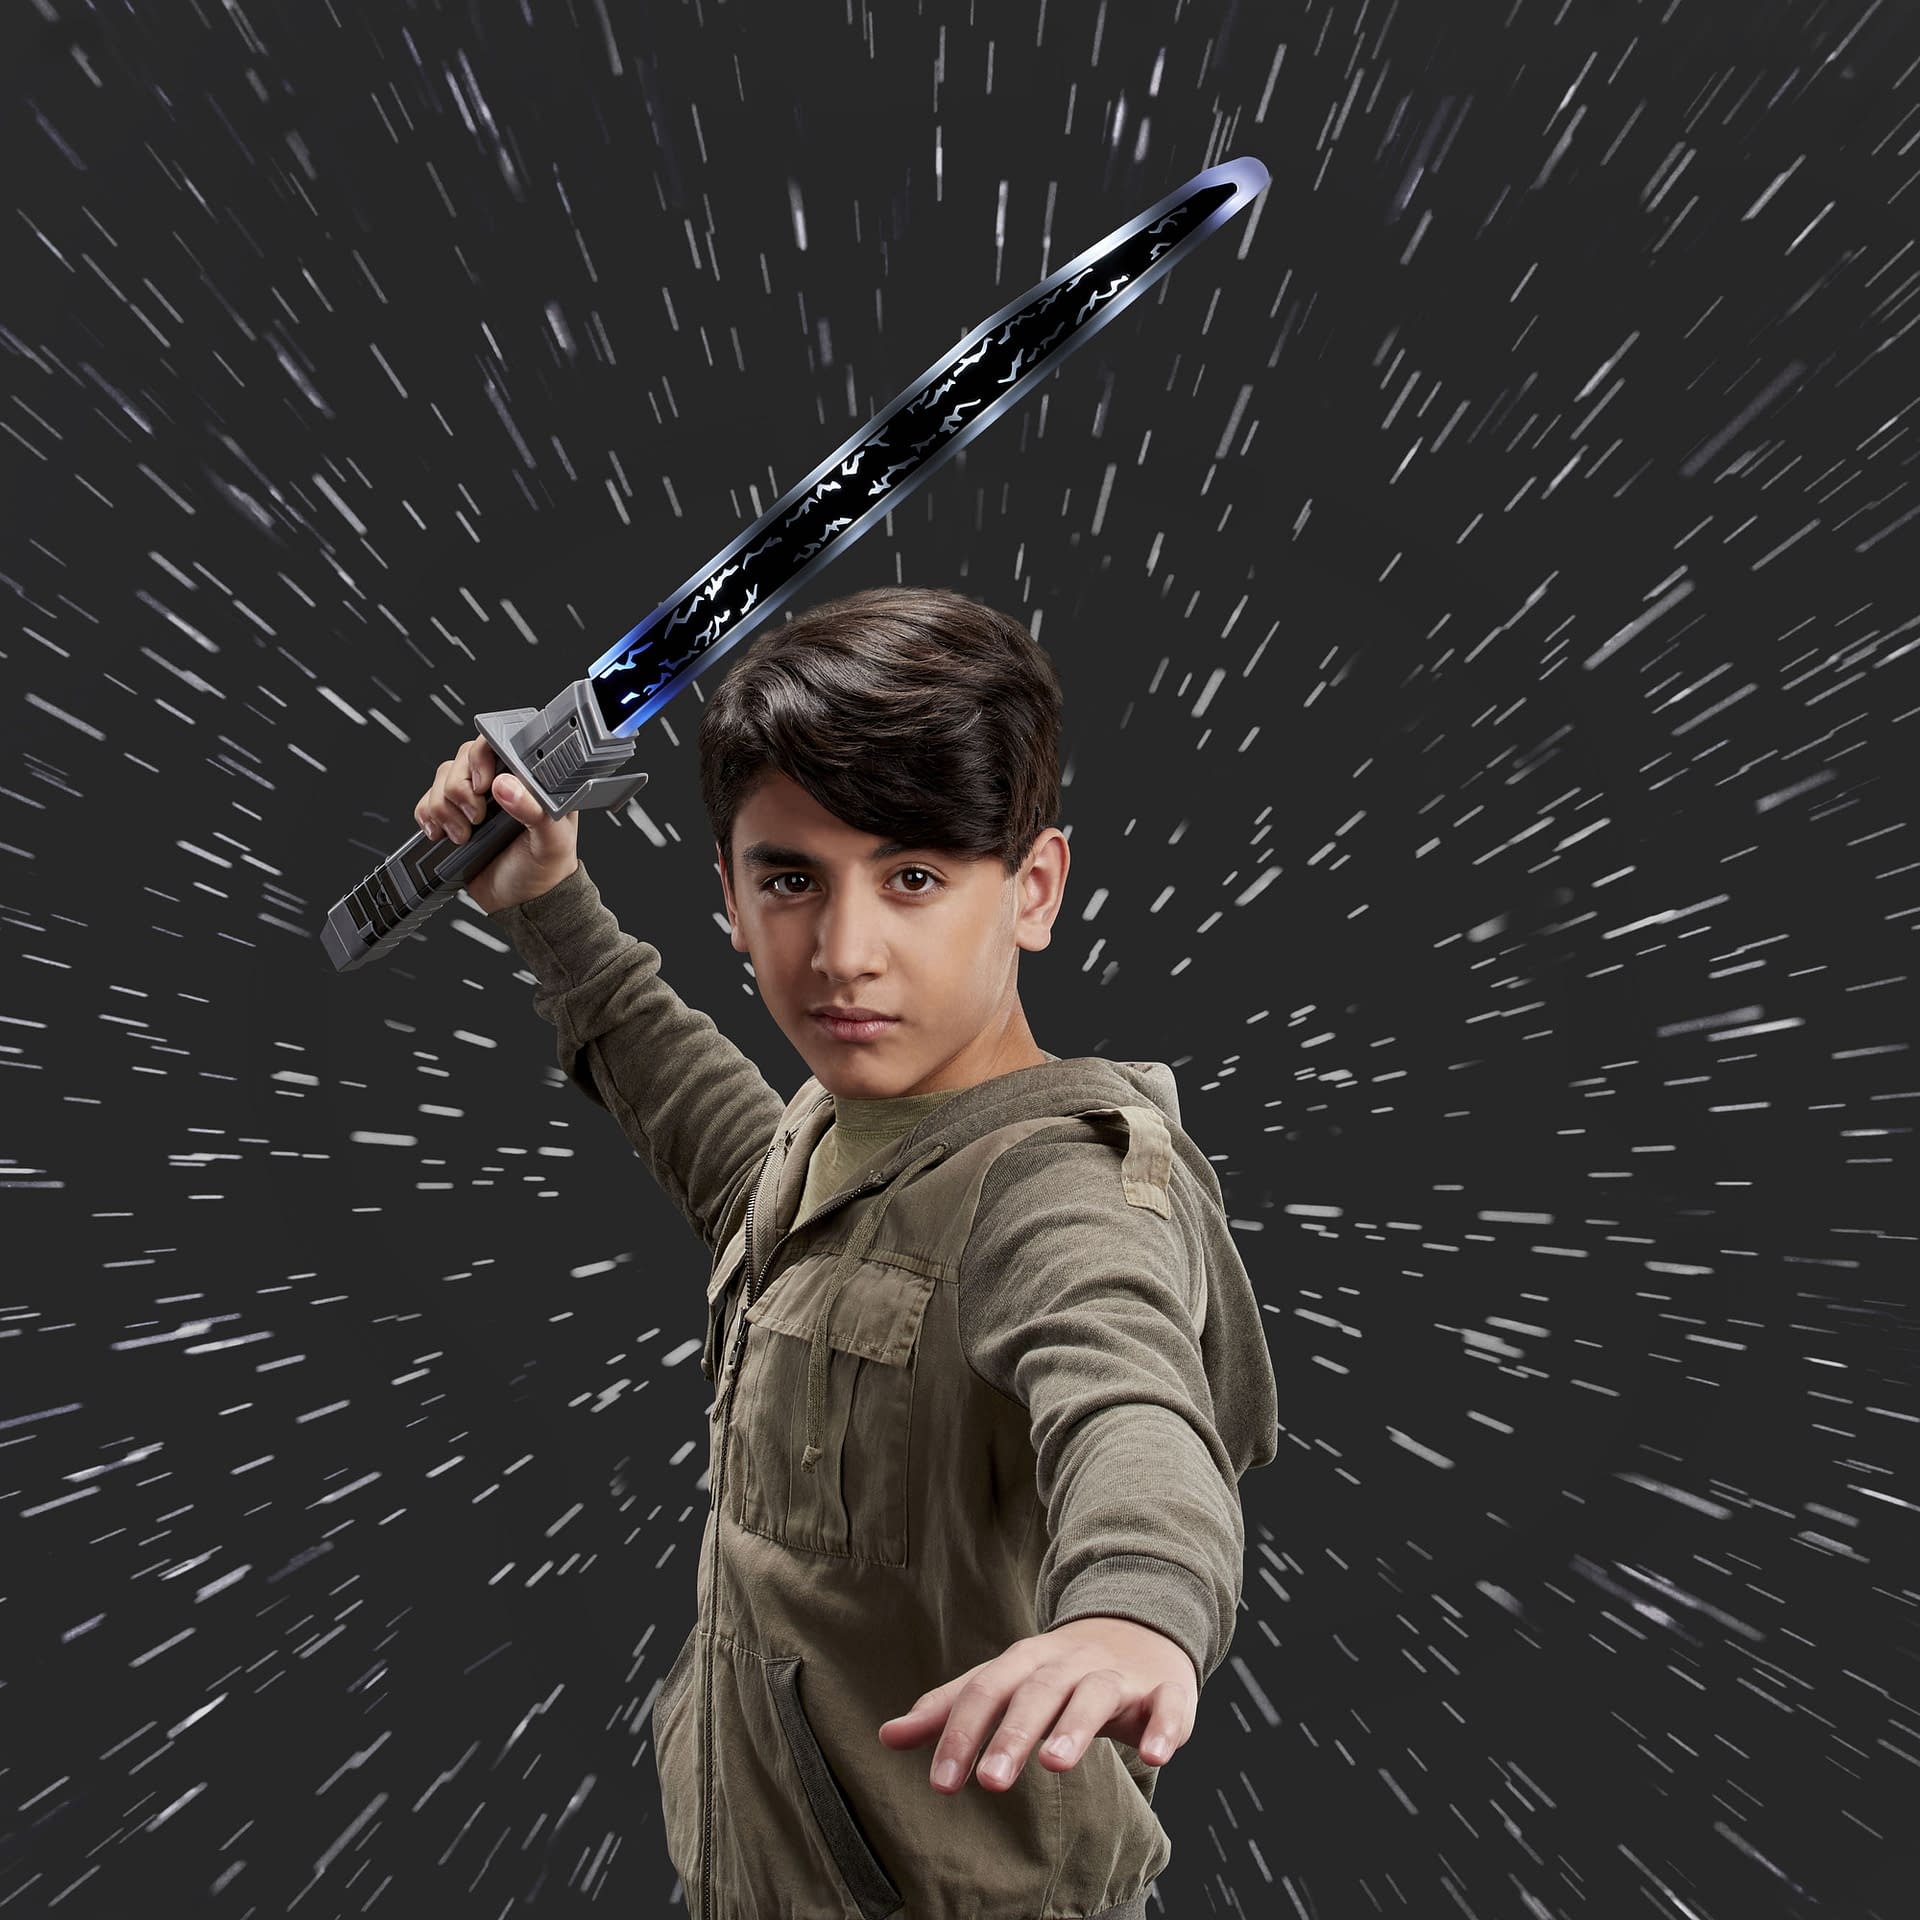 New Ancient Star Wars Lightsabers are Coming Soon from Hasbro 